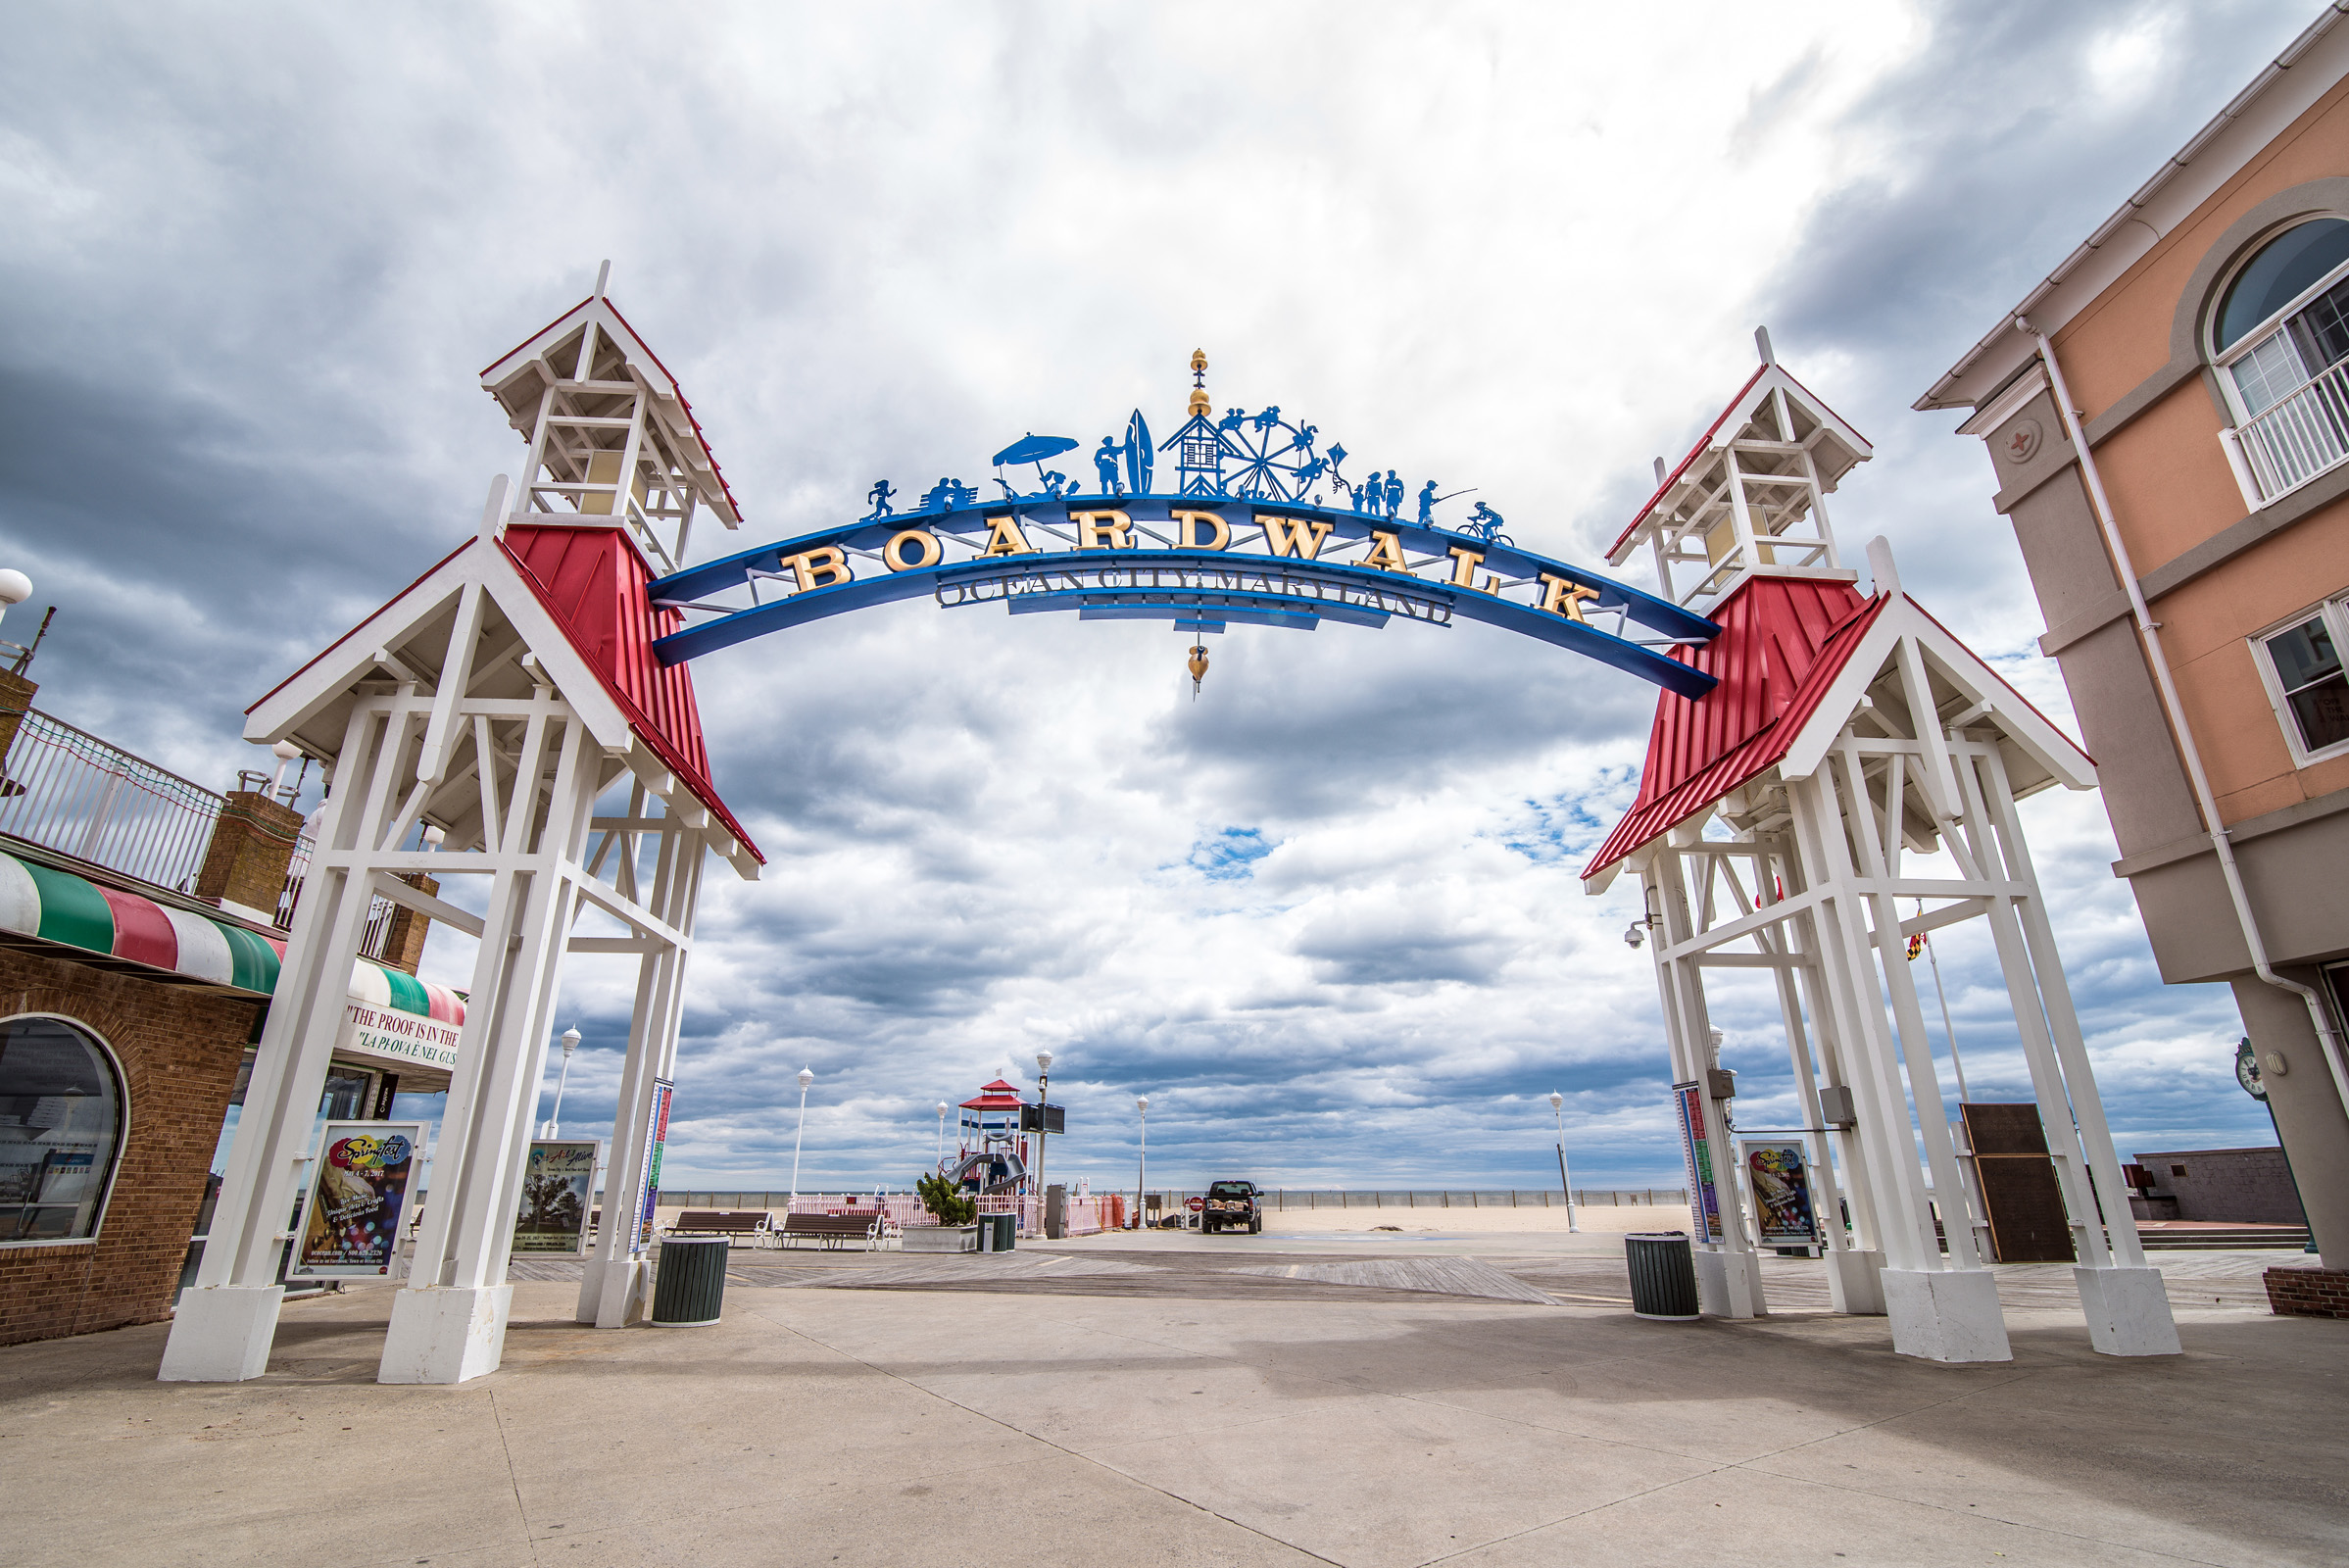 the entrance sign to the boardwalk of Ocean City,MD.